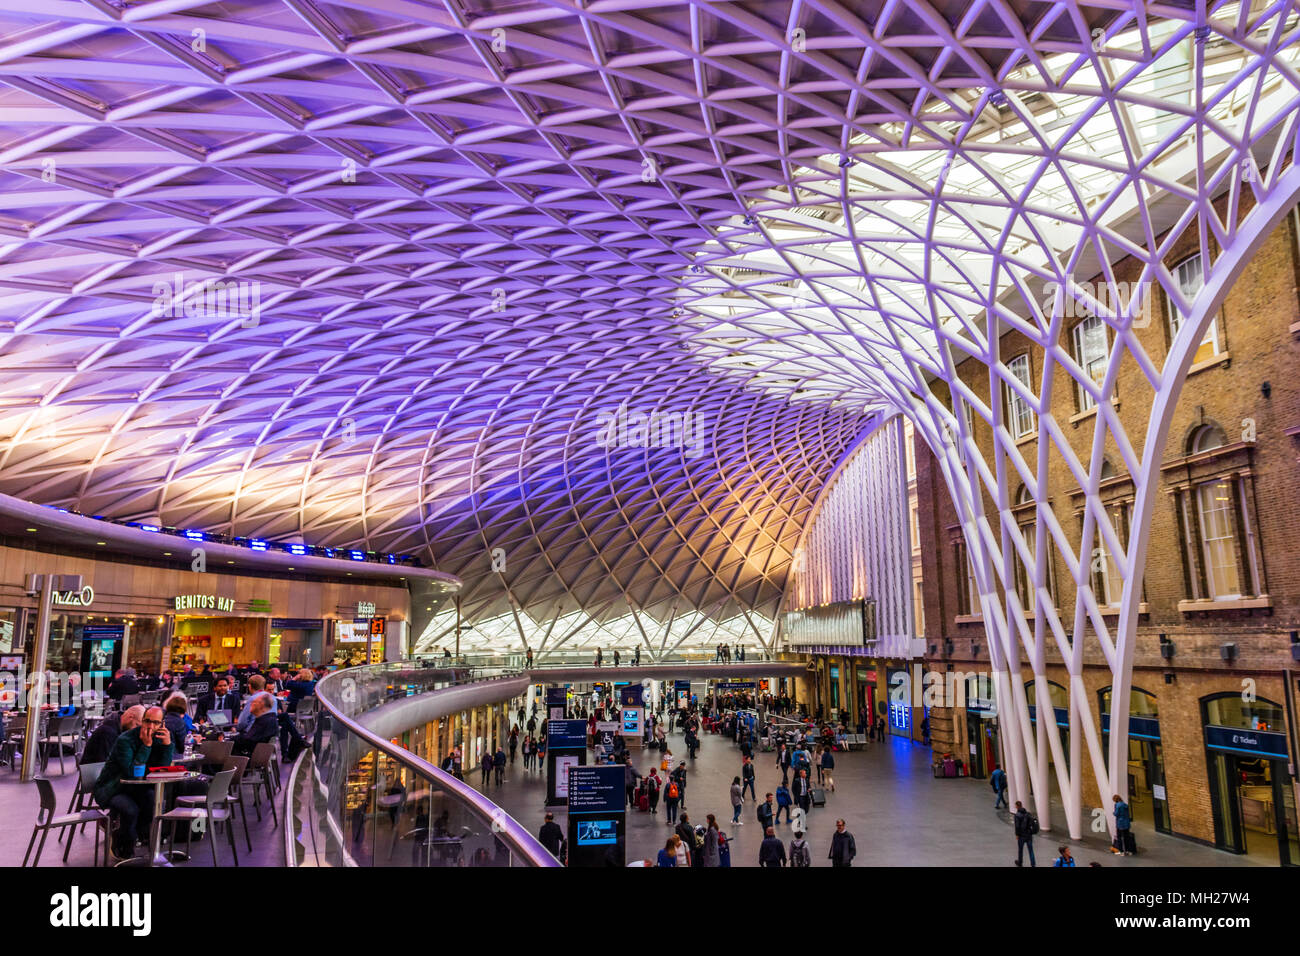 The concourse and plaza of Kings Cross Station, London, UK Stock Photo